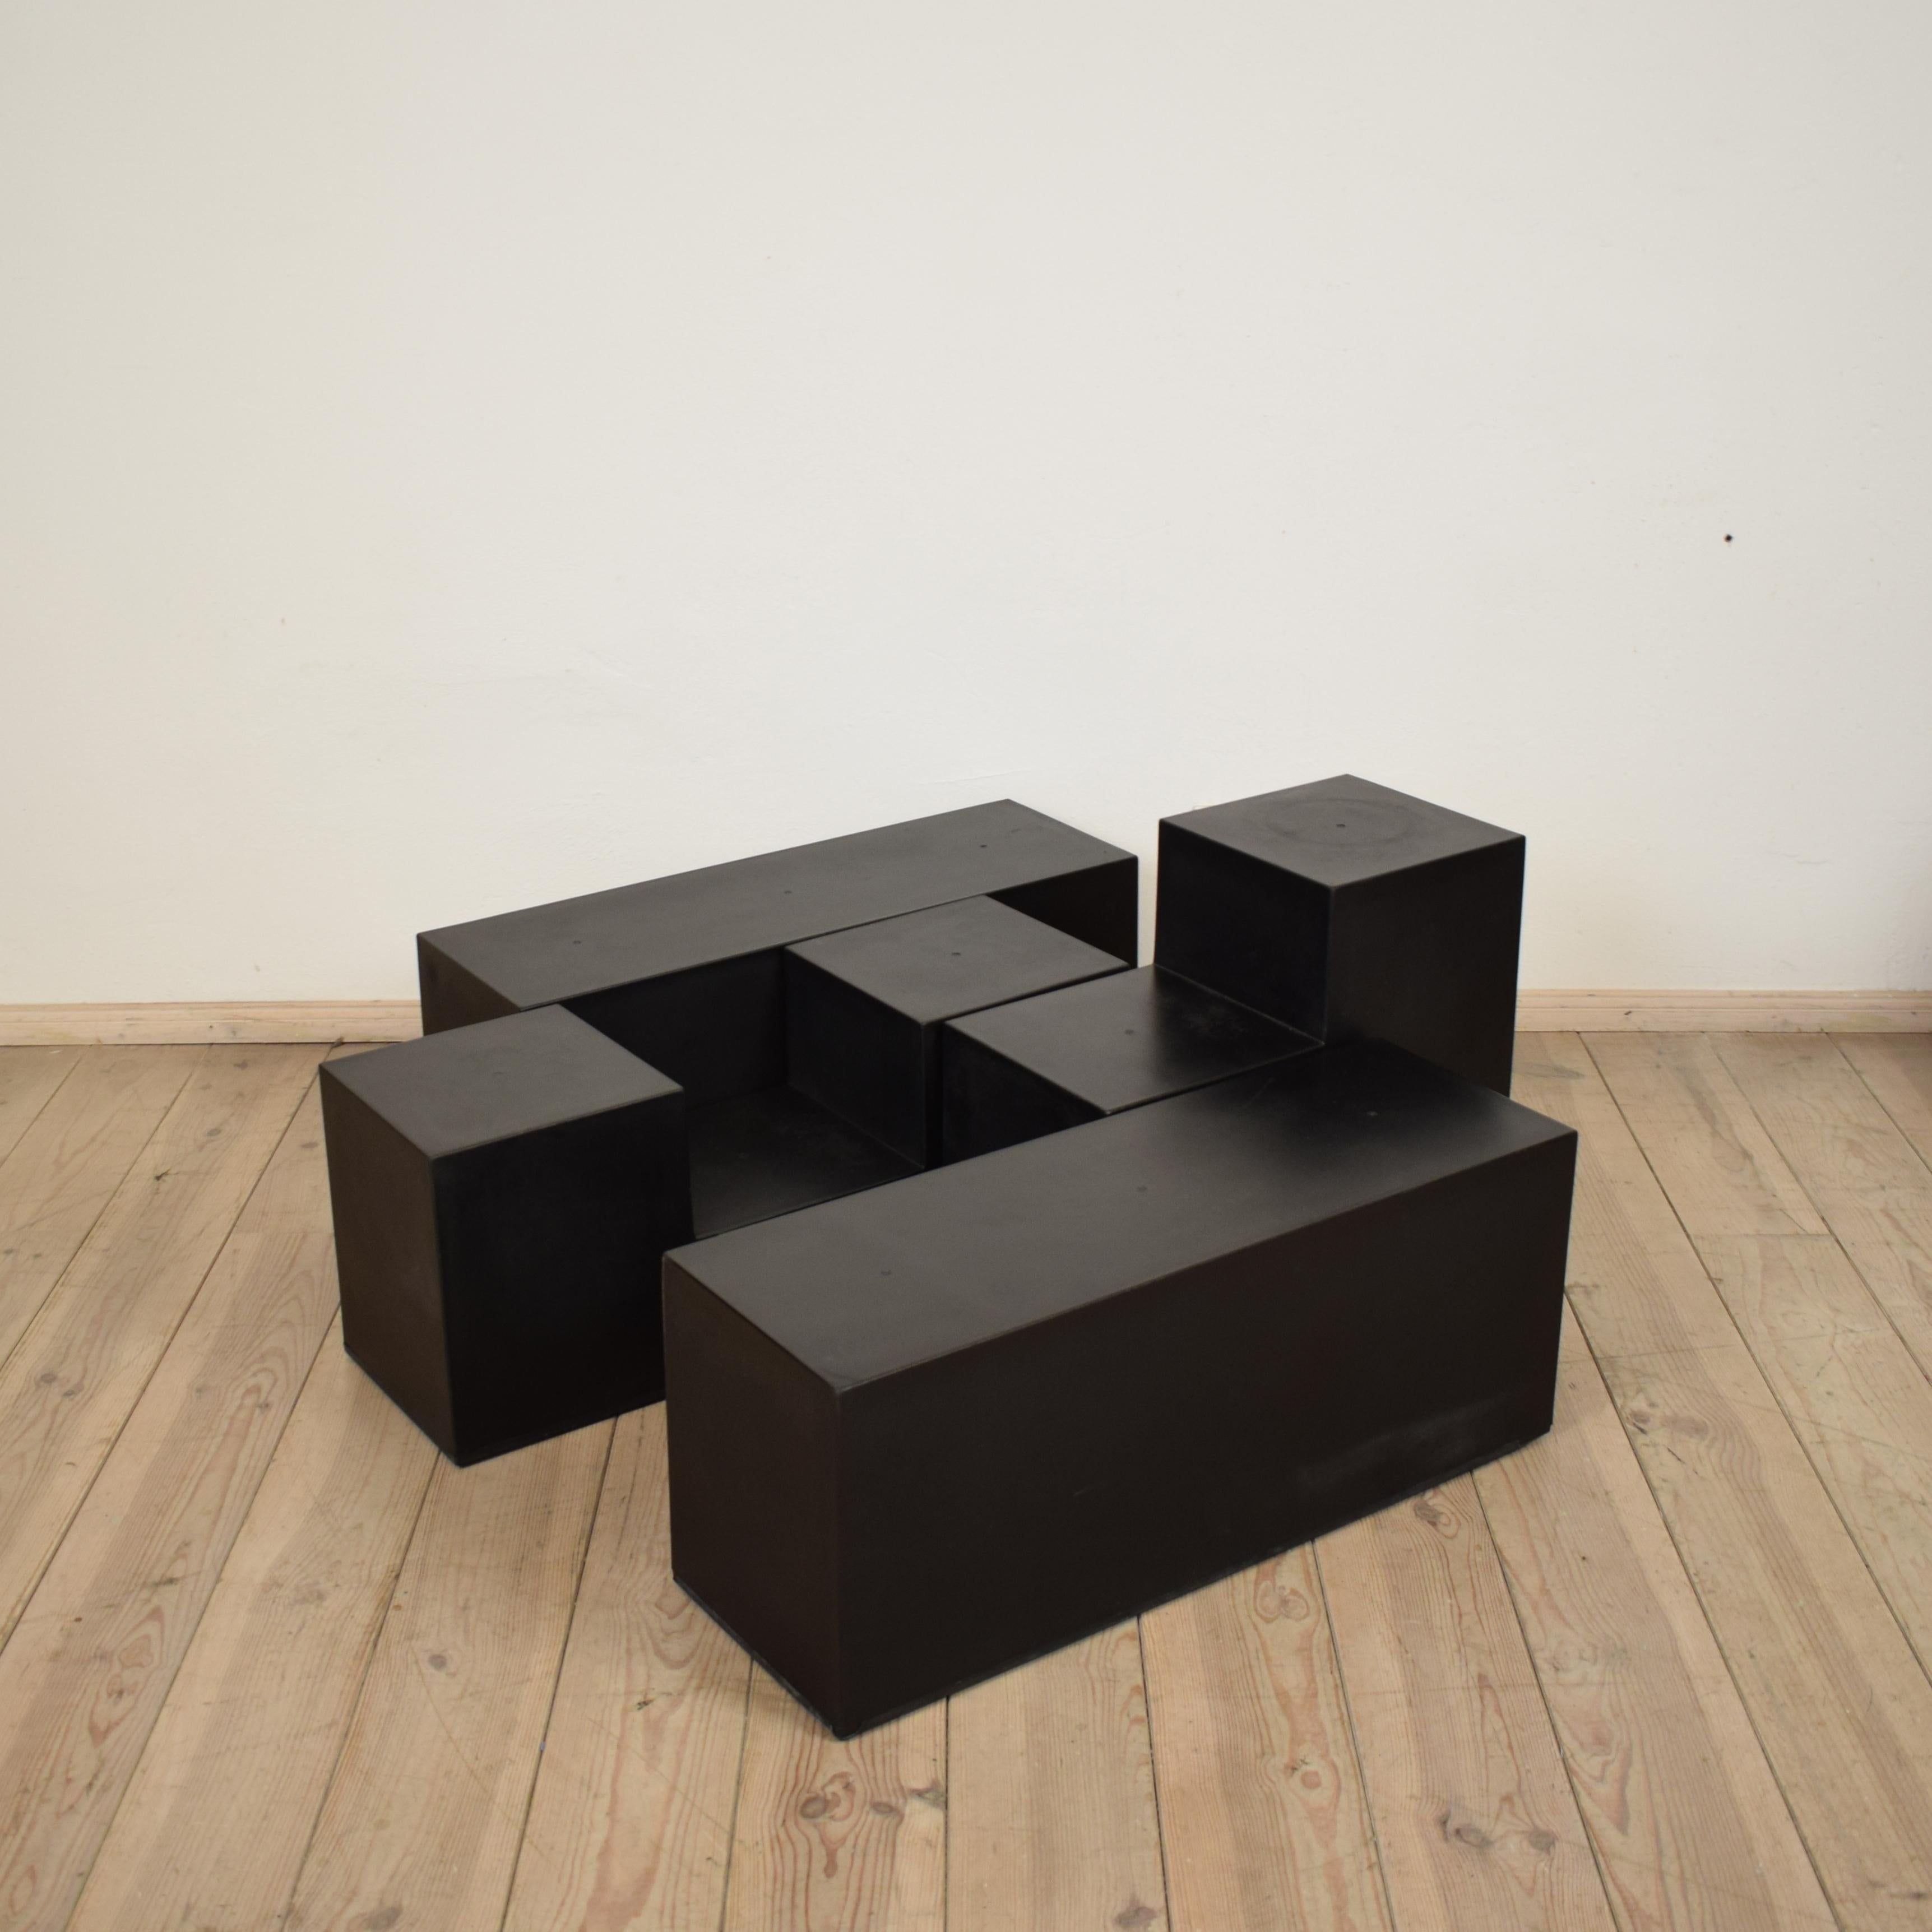 This great set of four modular elements ‘Gli Scacchi,’ designed by Mario Bellini for B&B Italia in 1971, can be combined in various ways to be used as side tables or seating units.
The elements are made of black duraplum plastic.
They resemble